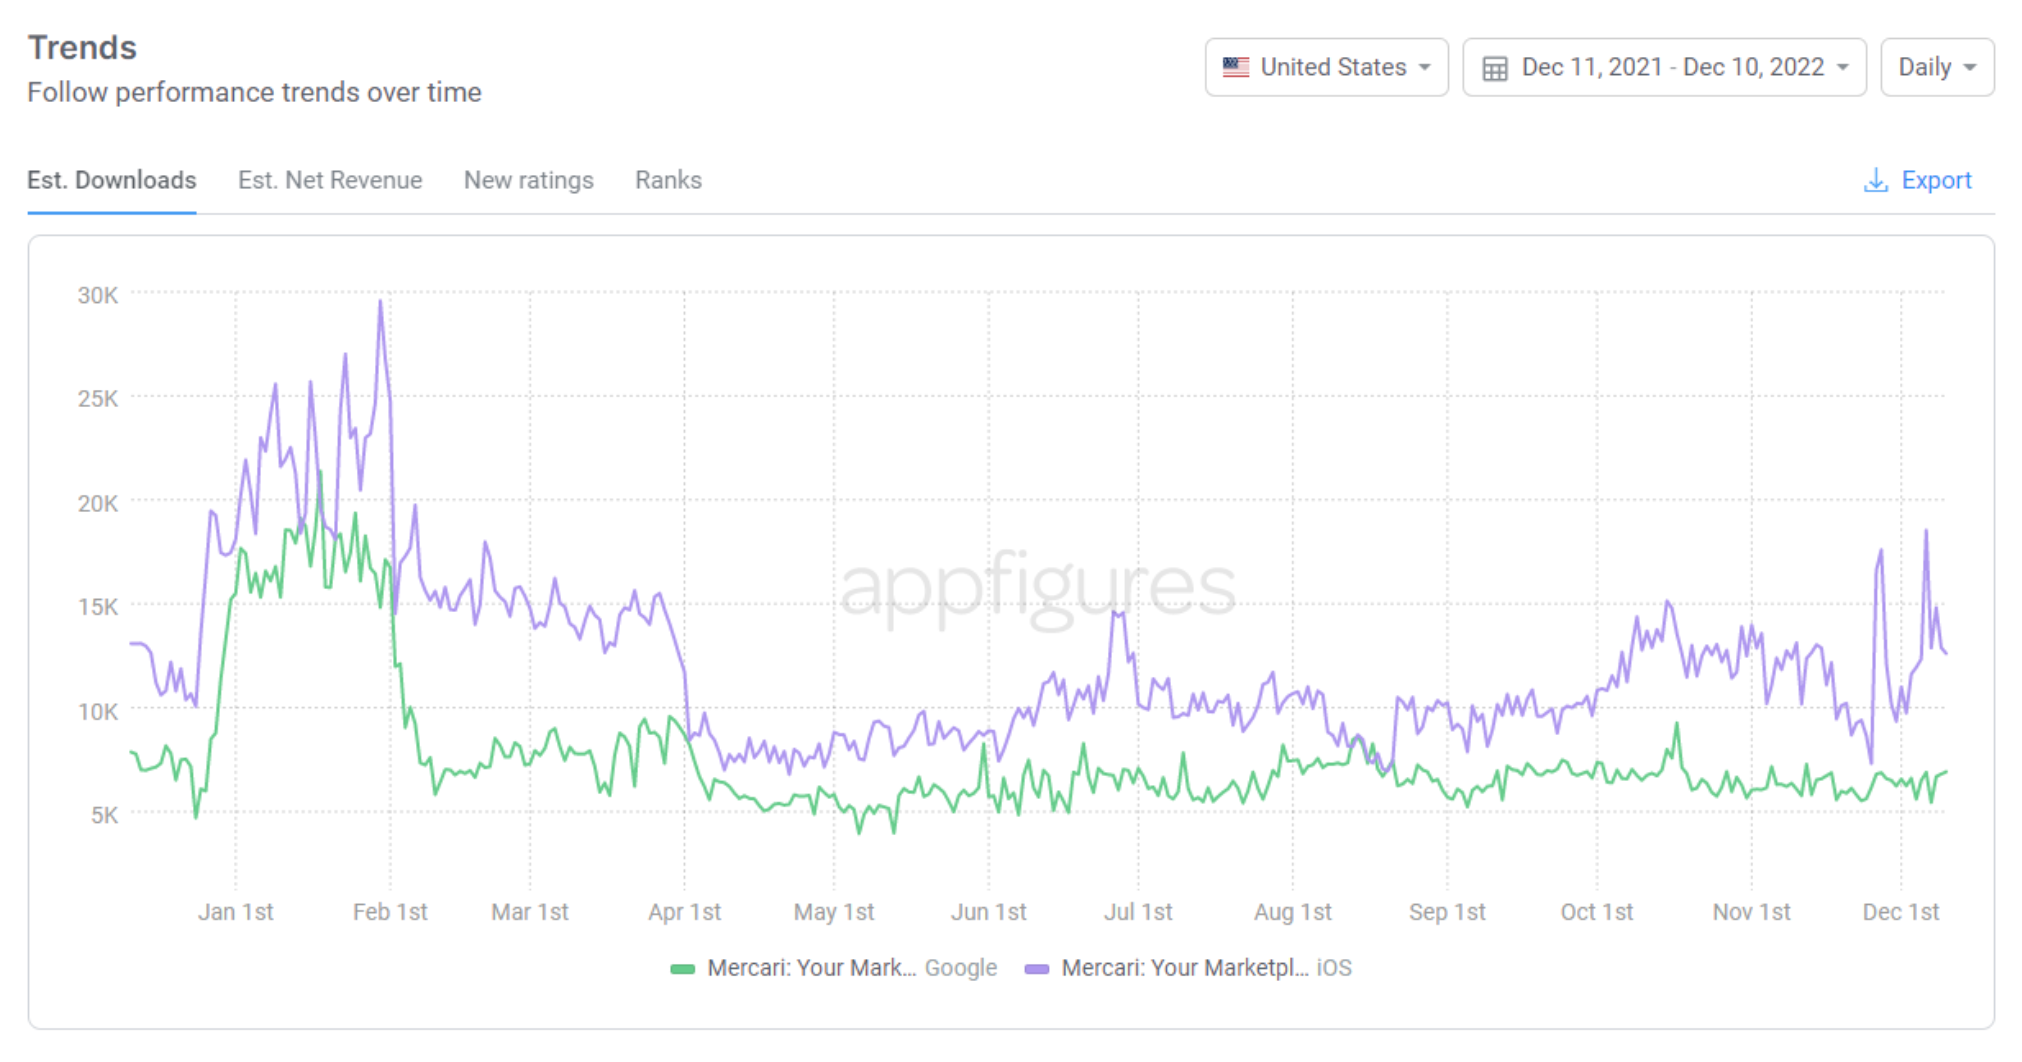 Combined installs per day data for iOS + Android downloads by day via appfigures